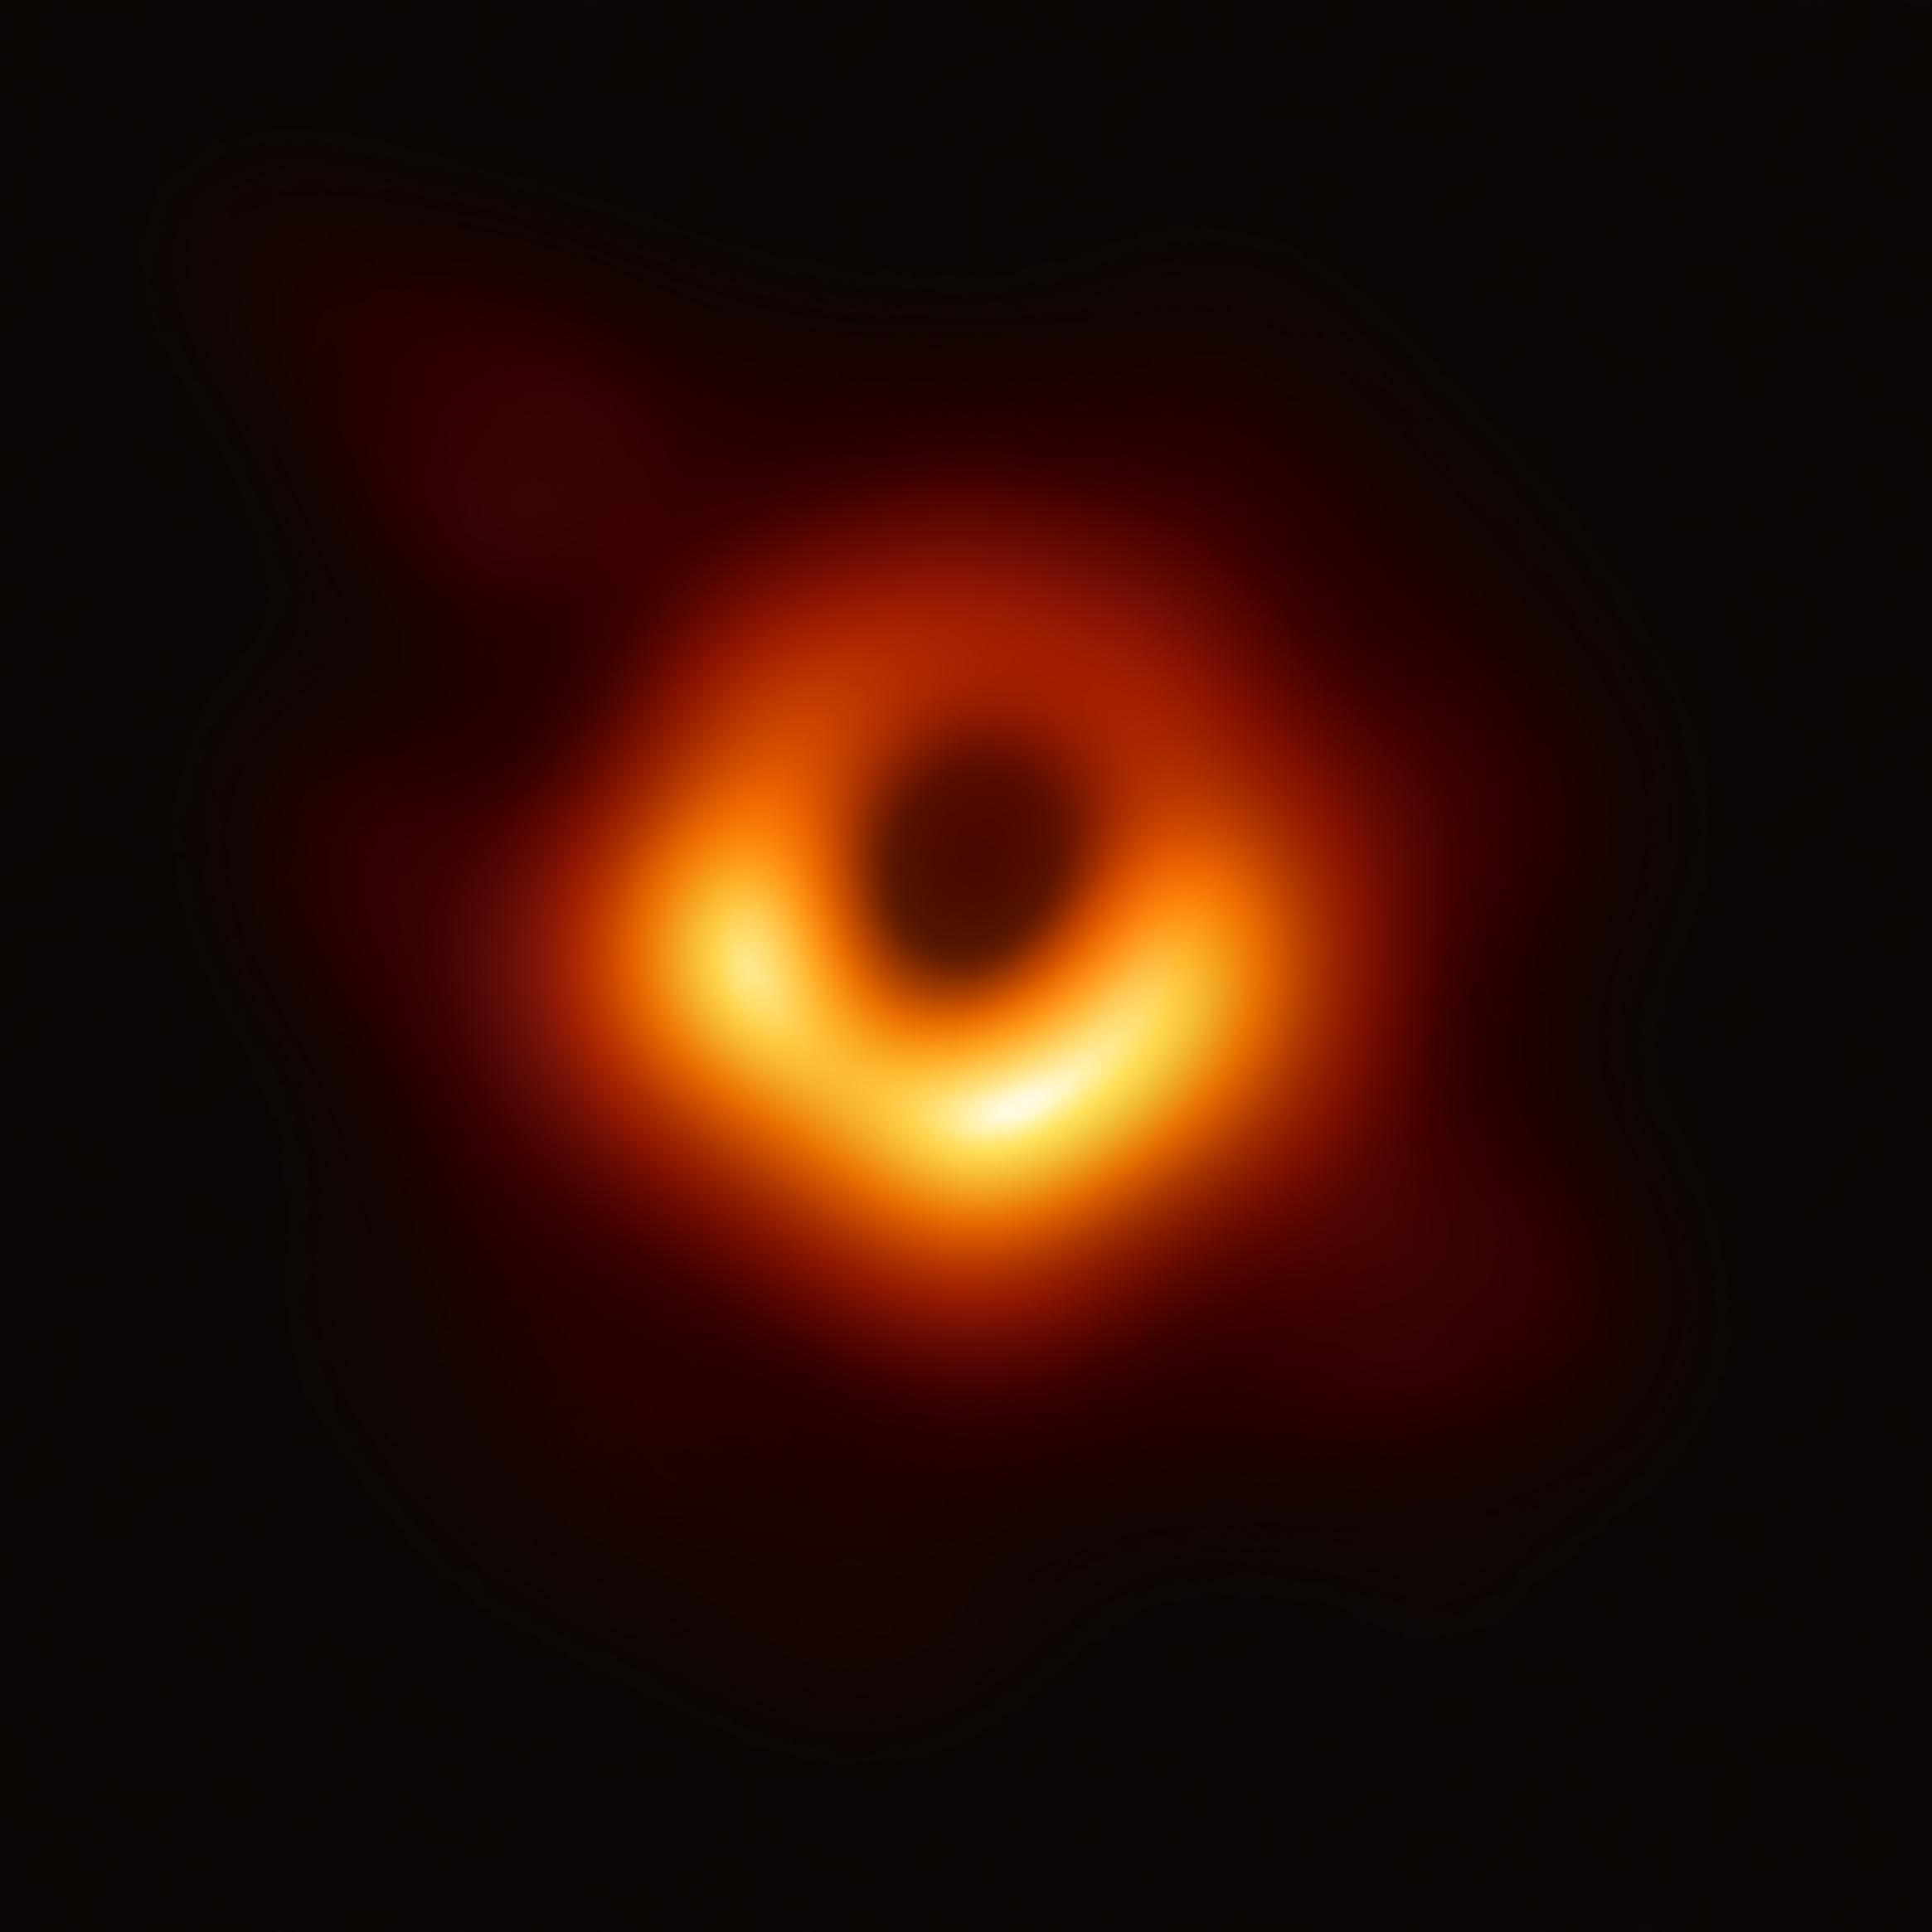 Scientists Capture First Picture Of Black Hole